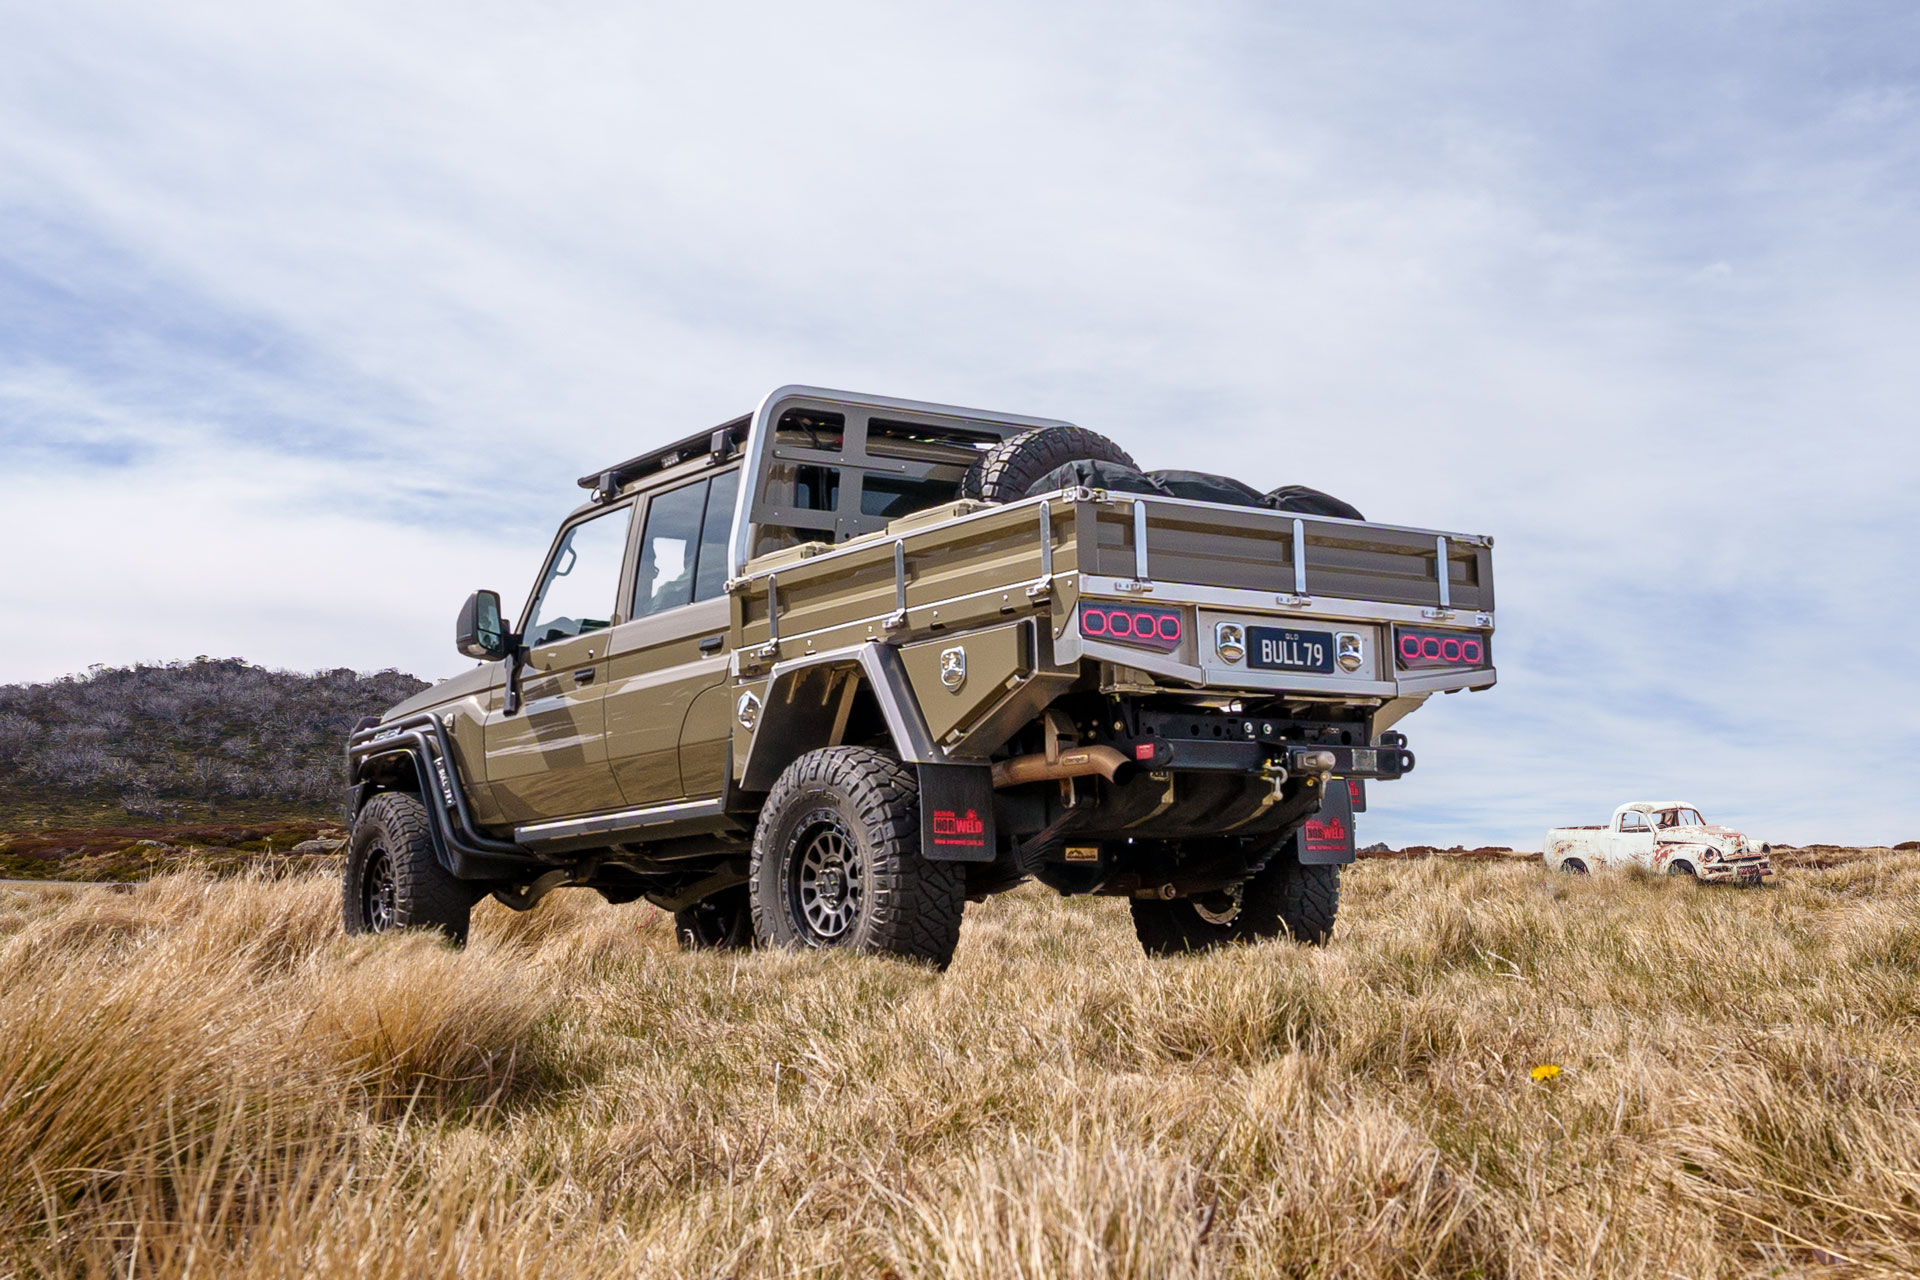 The top six off-road expedition vehicles